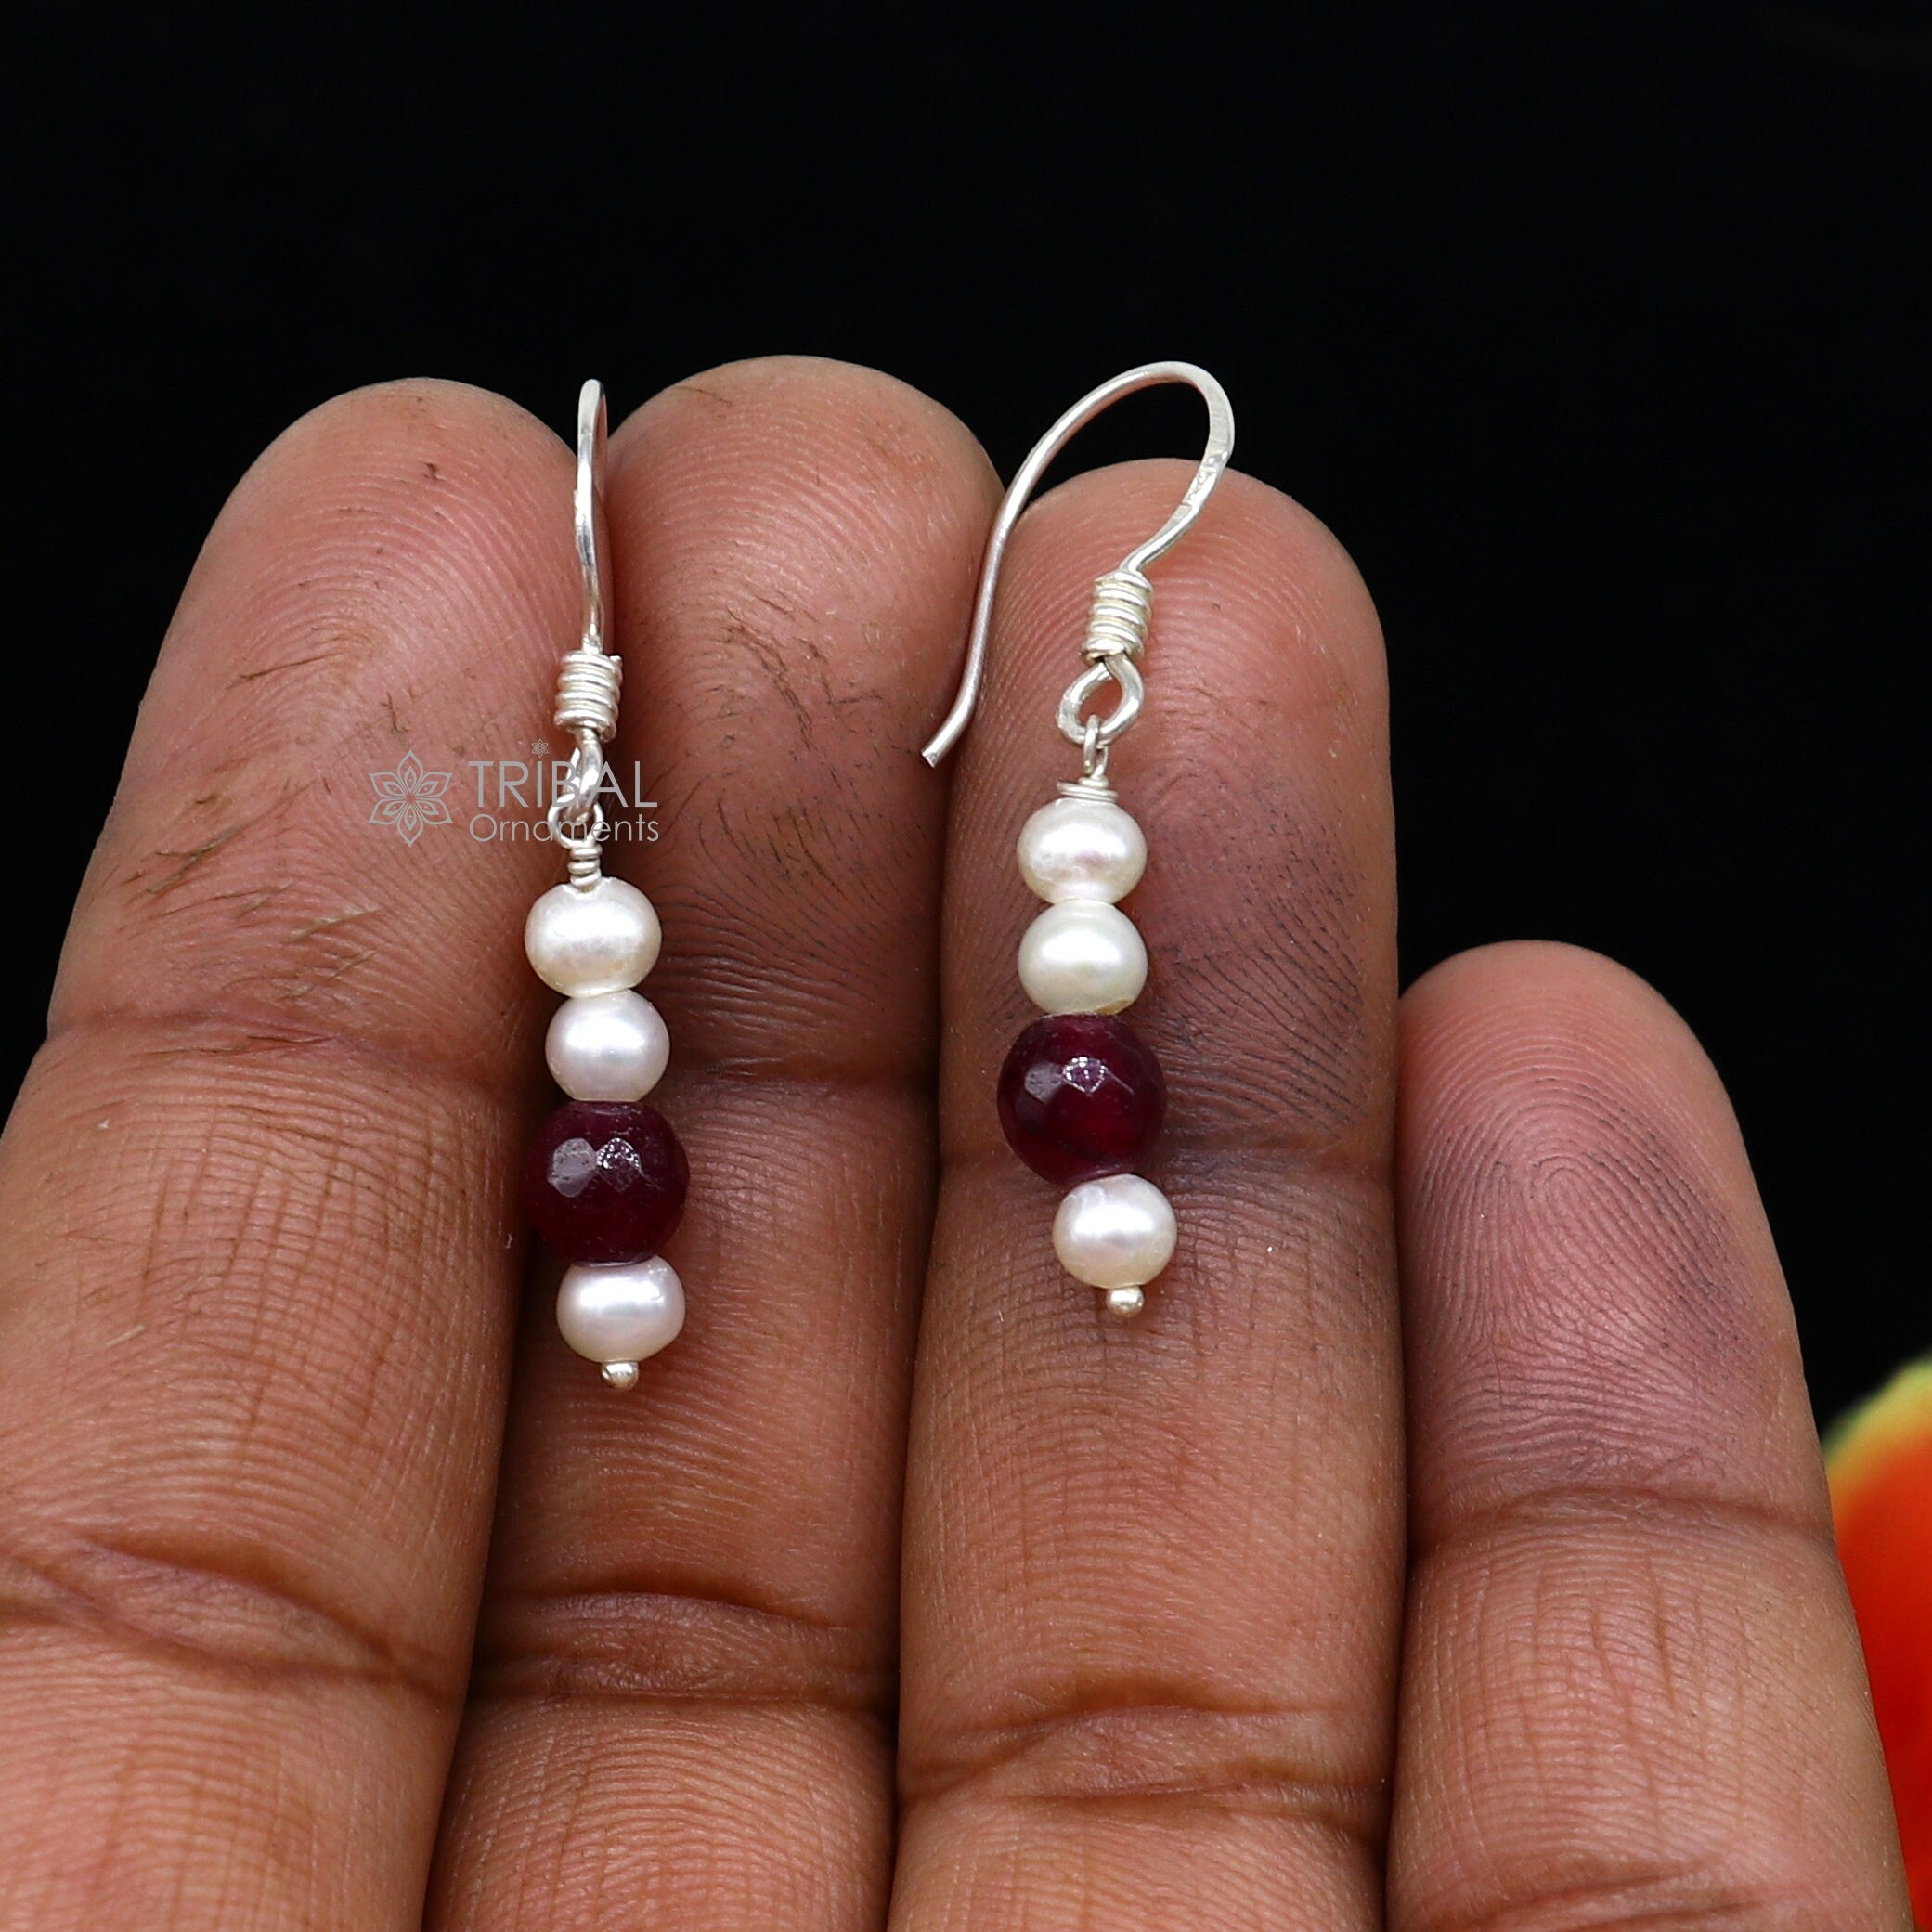 White Stylish Round Pearl Earrings in Hook Design – HighSpark